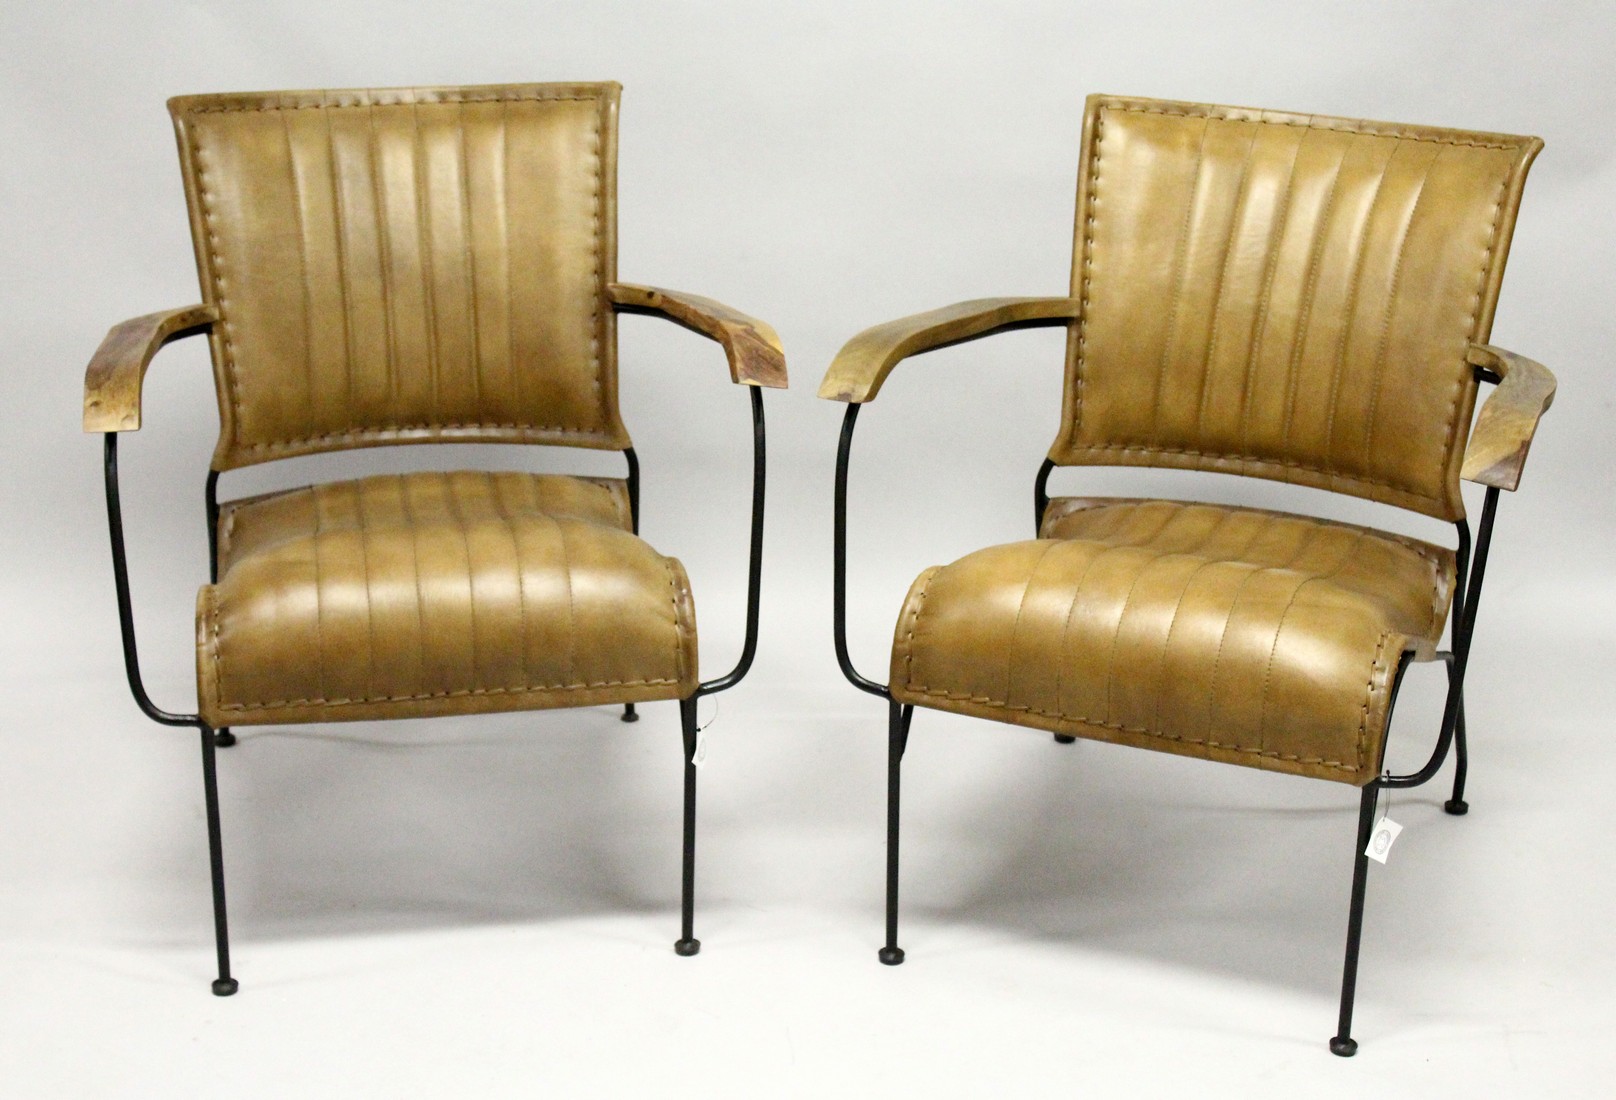 A PAIR OF MODERN LEATHER, WROUGHT IRON AND WALNUT ARMCHAIRS